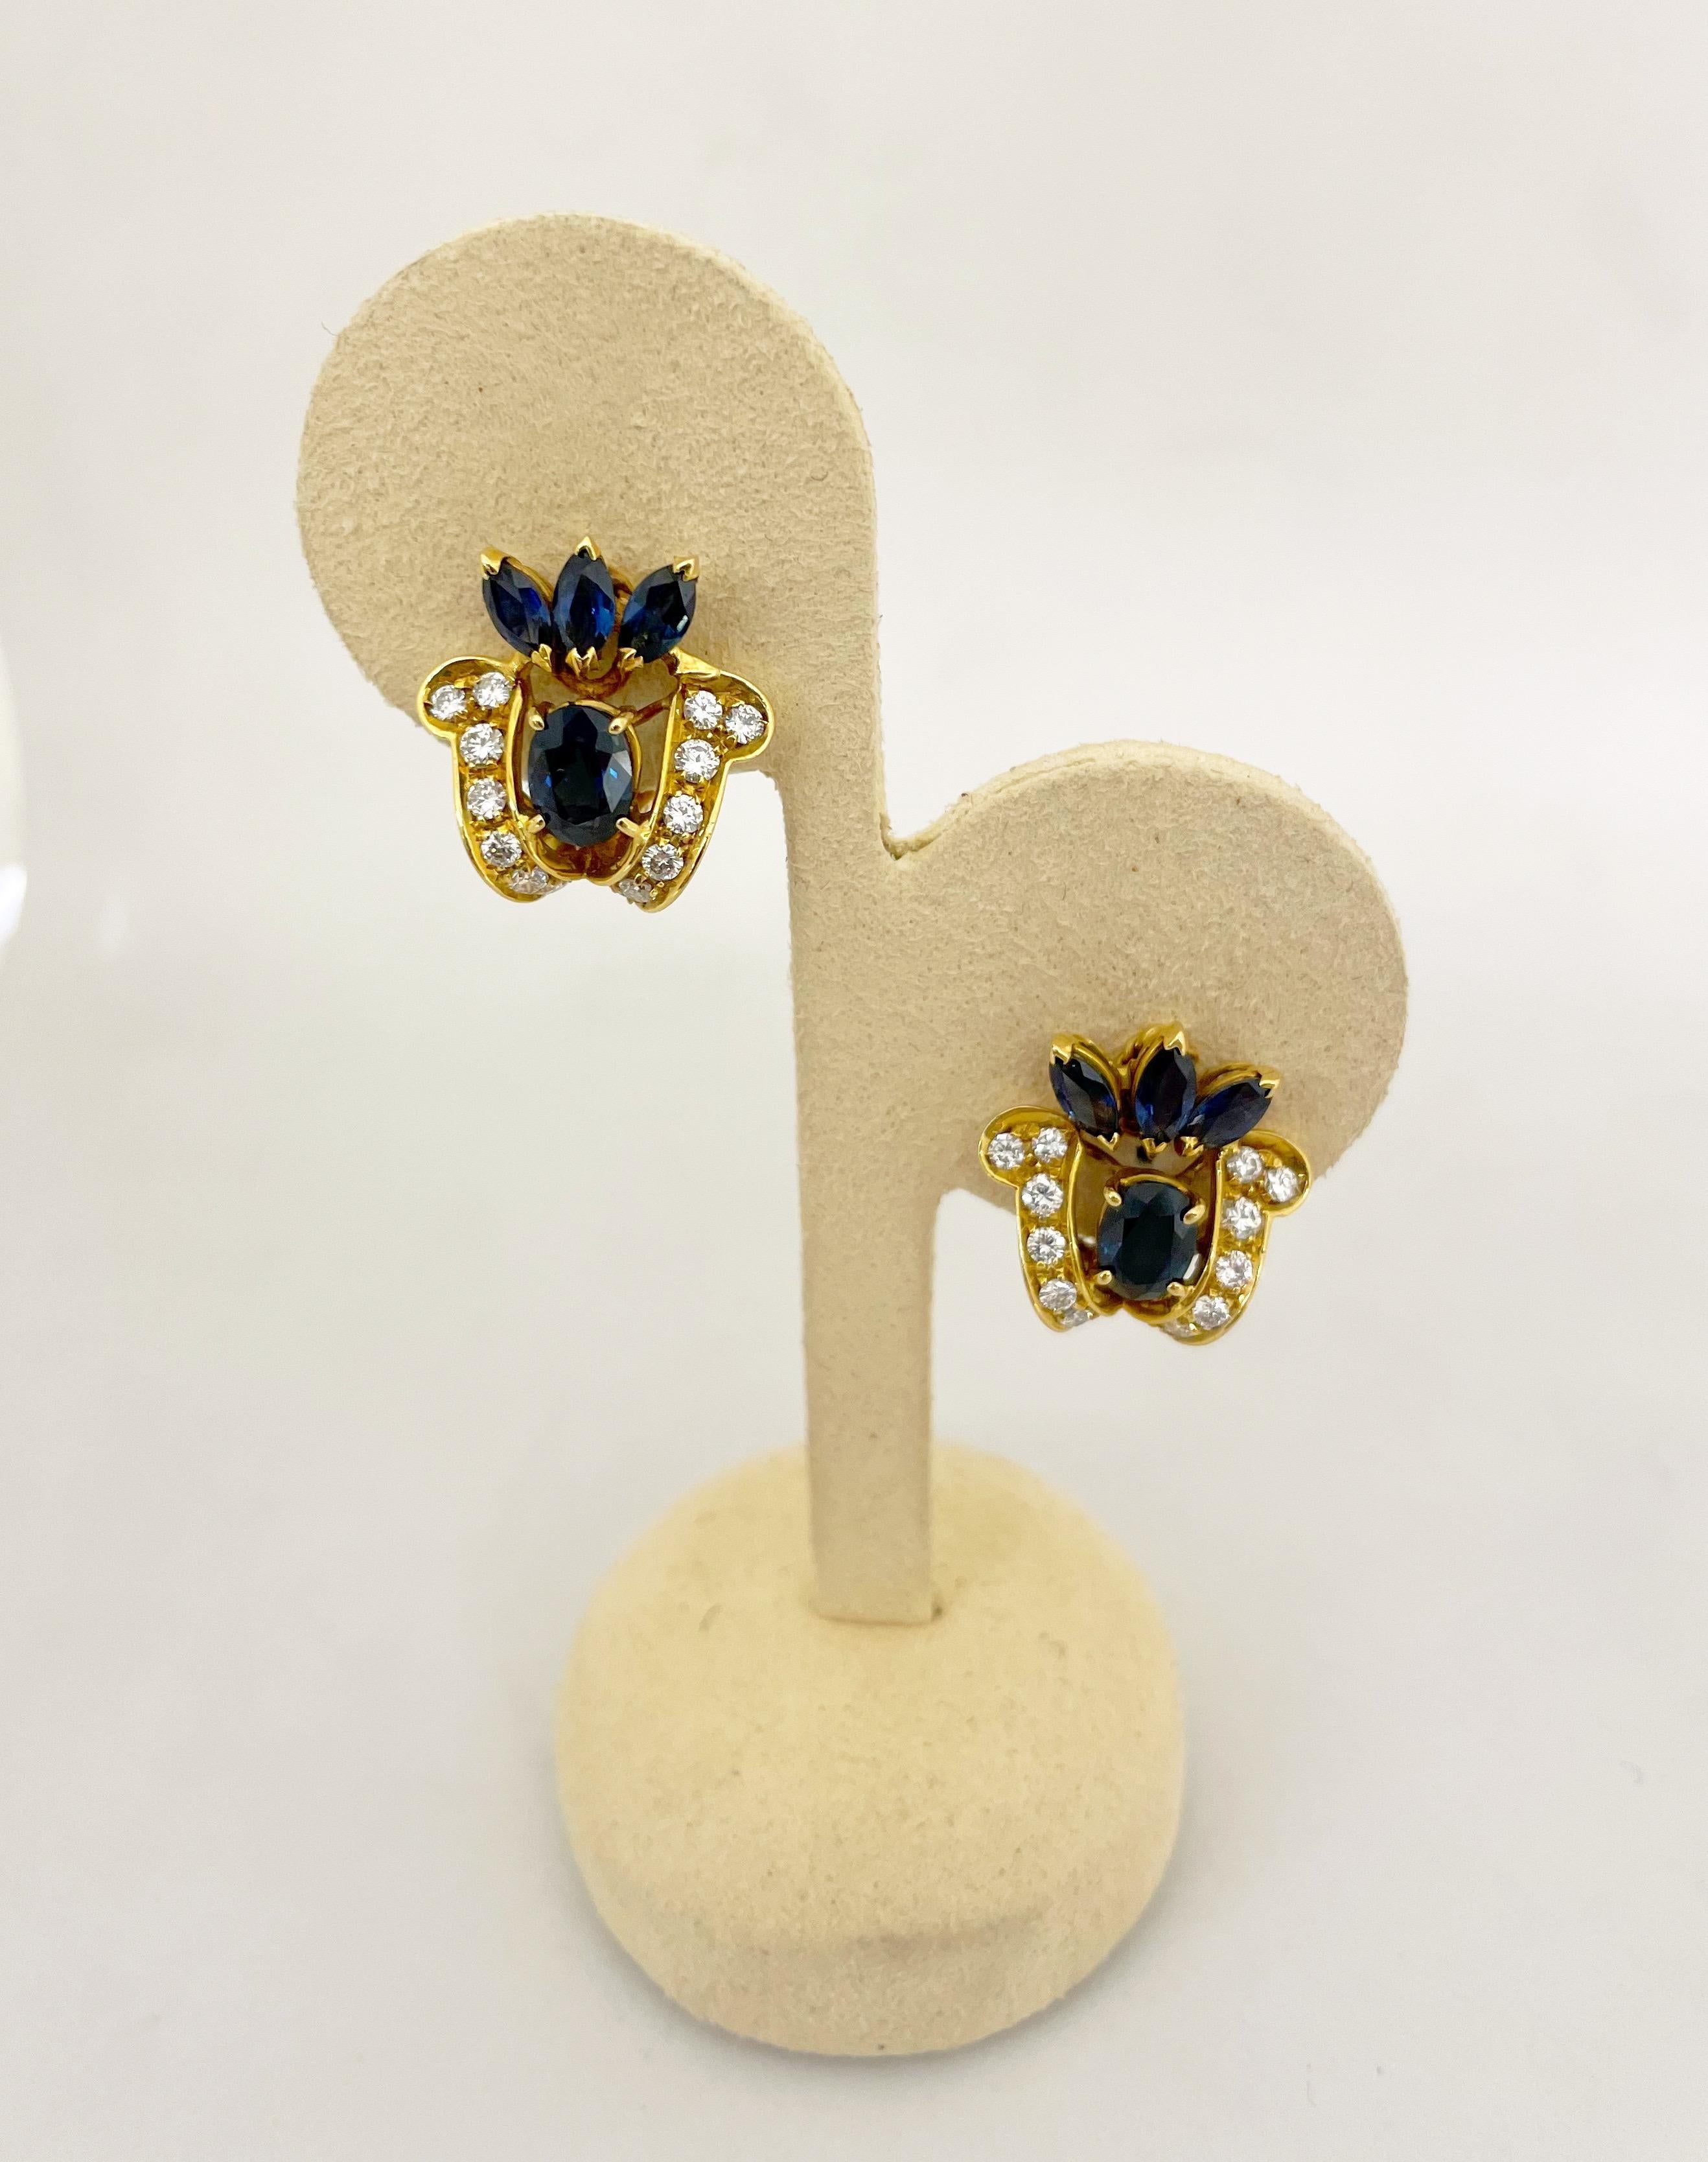 18 karat yellow gold earrings beautifully designed with 6 marquis and 2 oval blue sapphires. A total of 28 round brilliant diamonds highlight the blue sapphires . These earrings measure 7/8